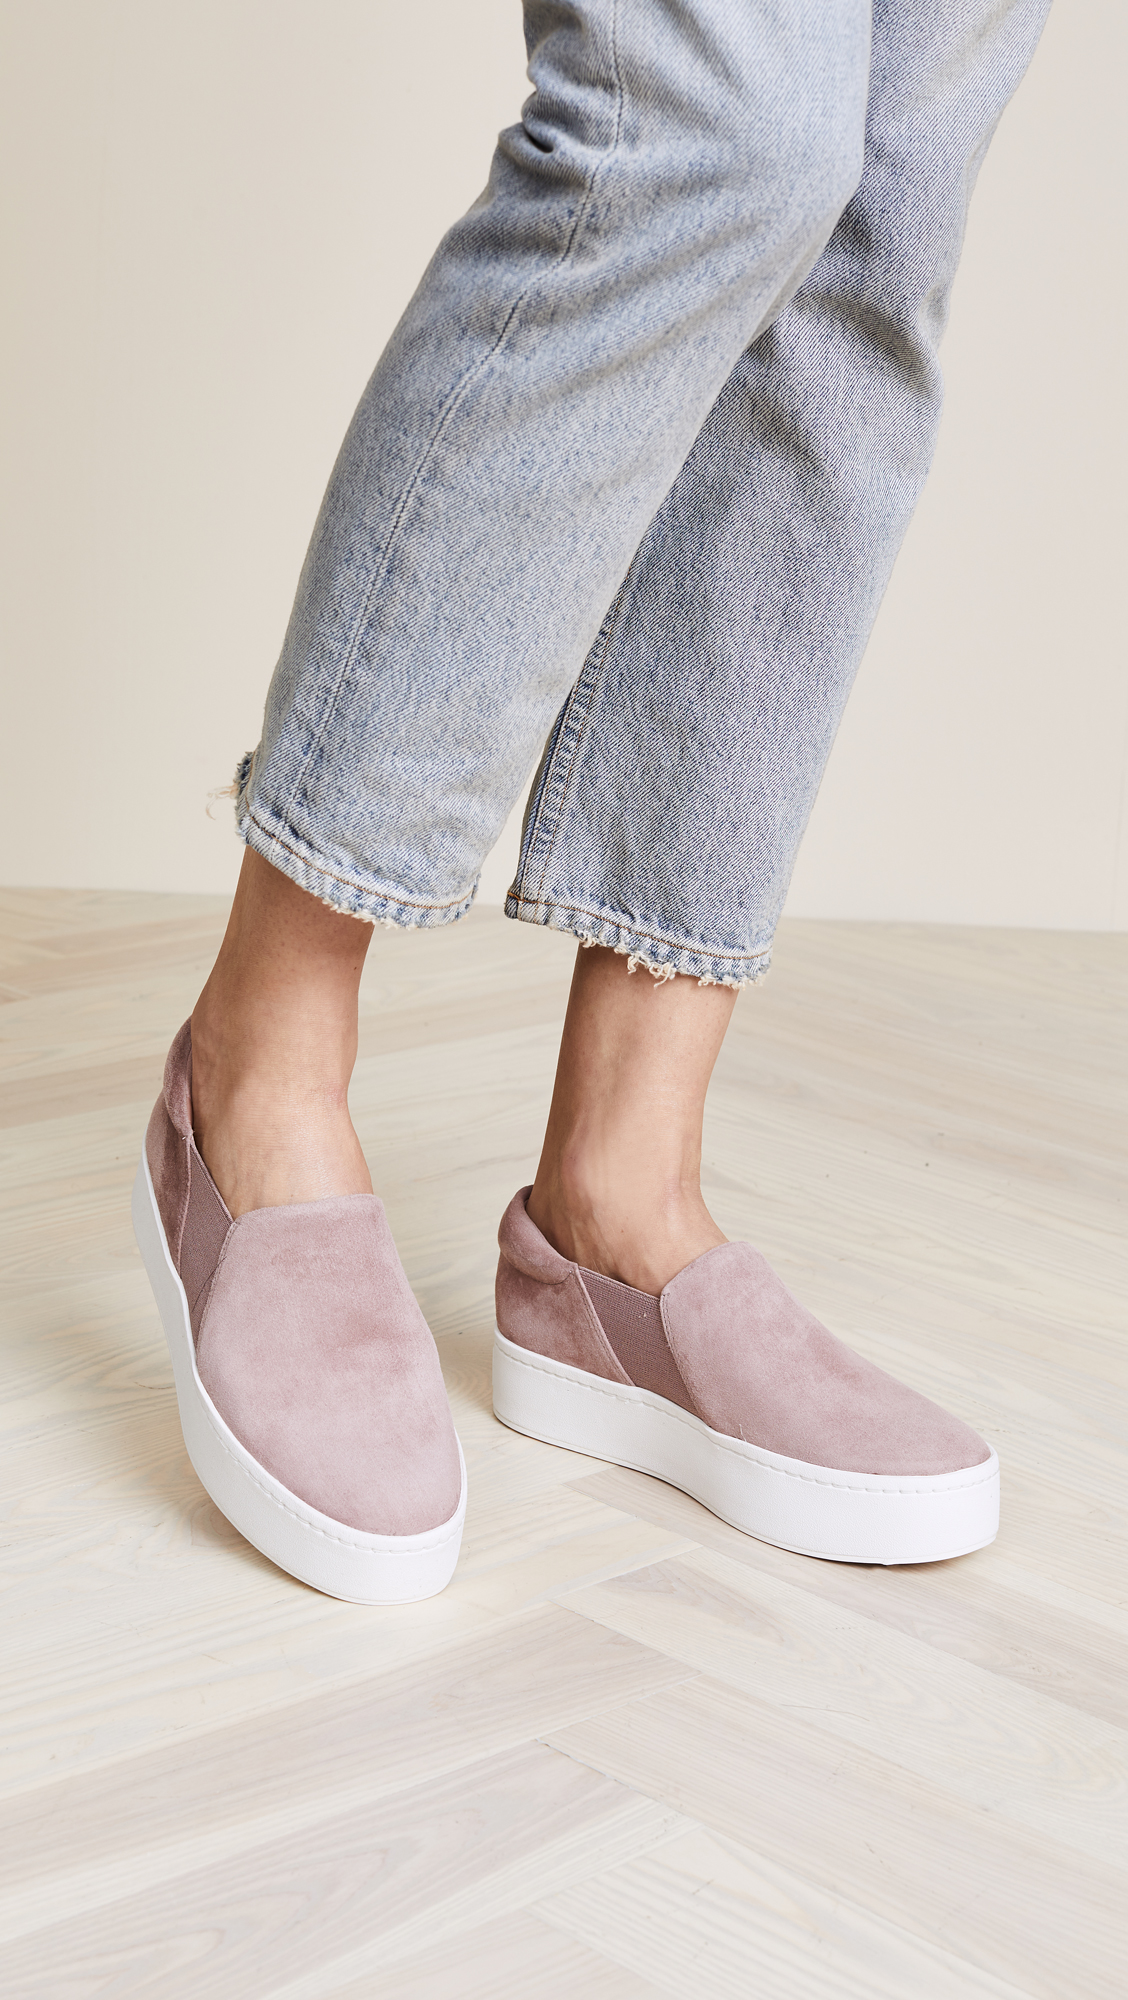 Vince Slip-On Sneakers on Sale at Nordstrom